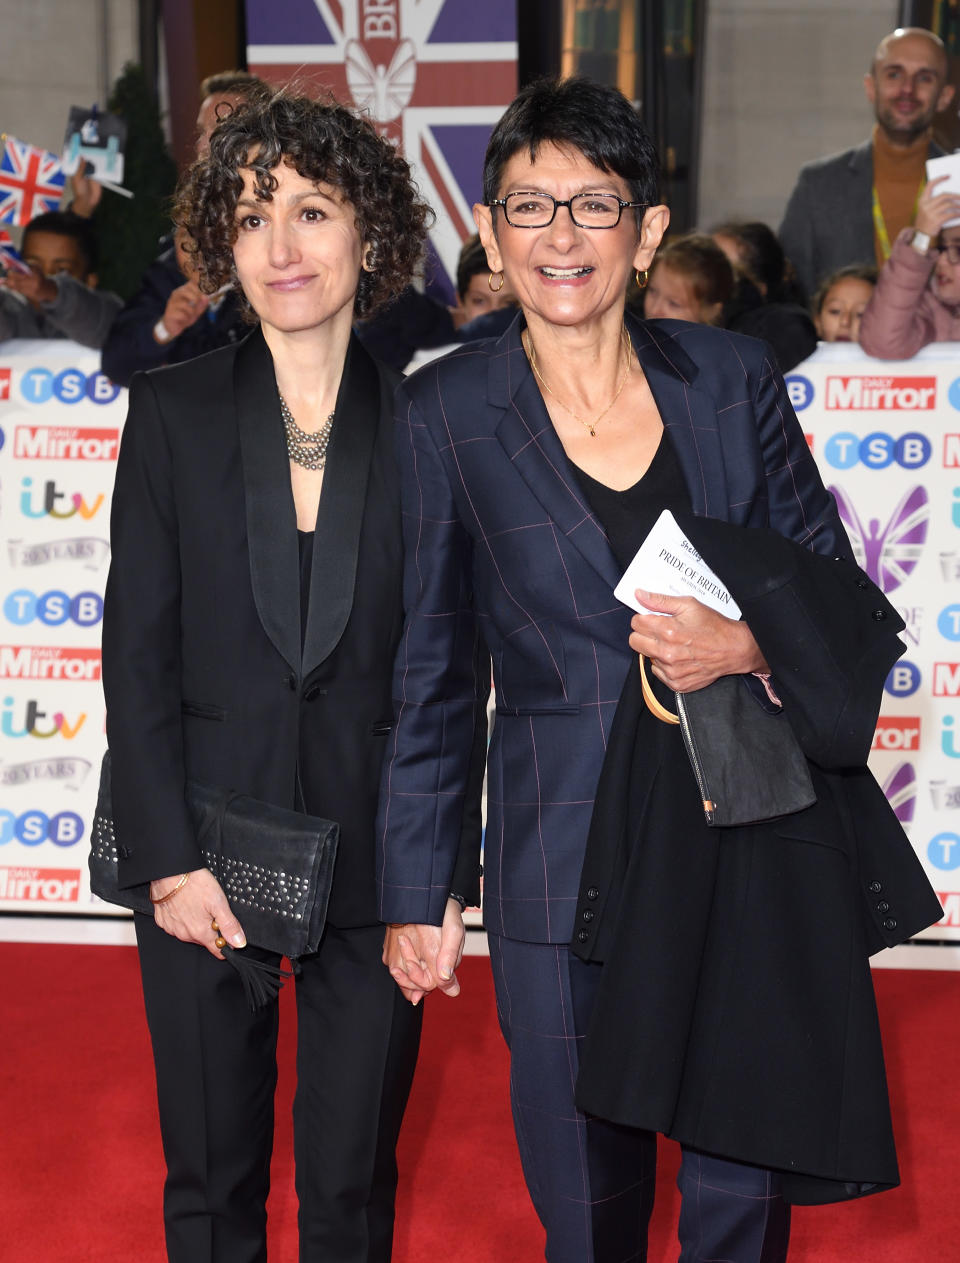 LONDON, ENGLAND - OCTOBER 28: Trilby James and Shelley King attend  the Pride Of Britain Awards 2019 at The Grosvenor House Hotel on October 28, 2019 in London, England. (Photo by Karwai Tang/WireImage)